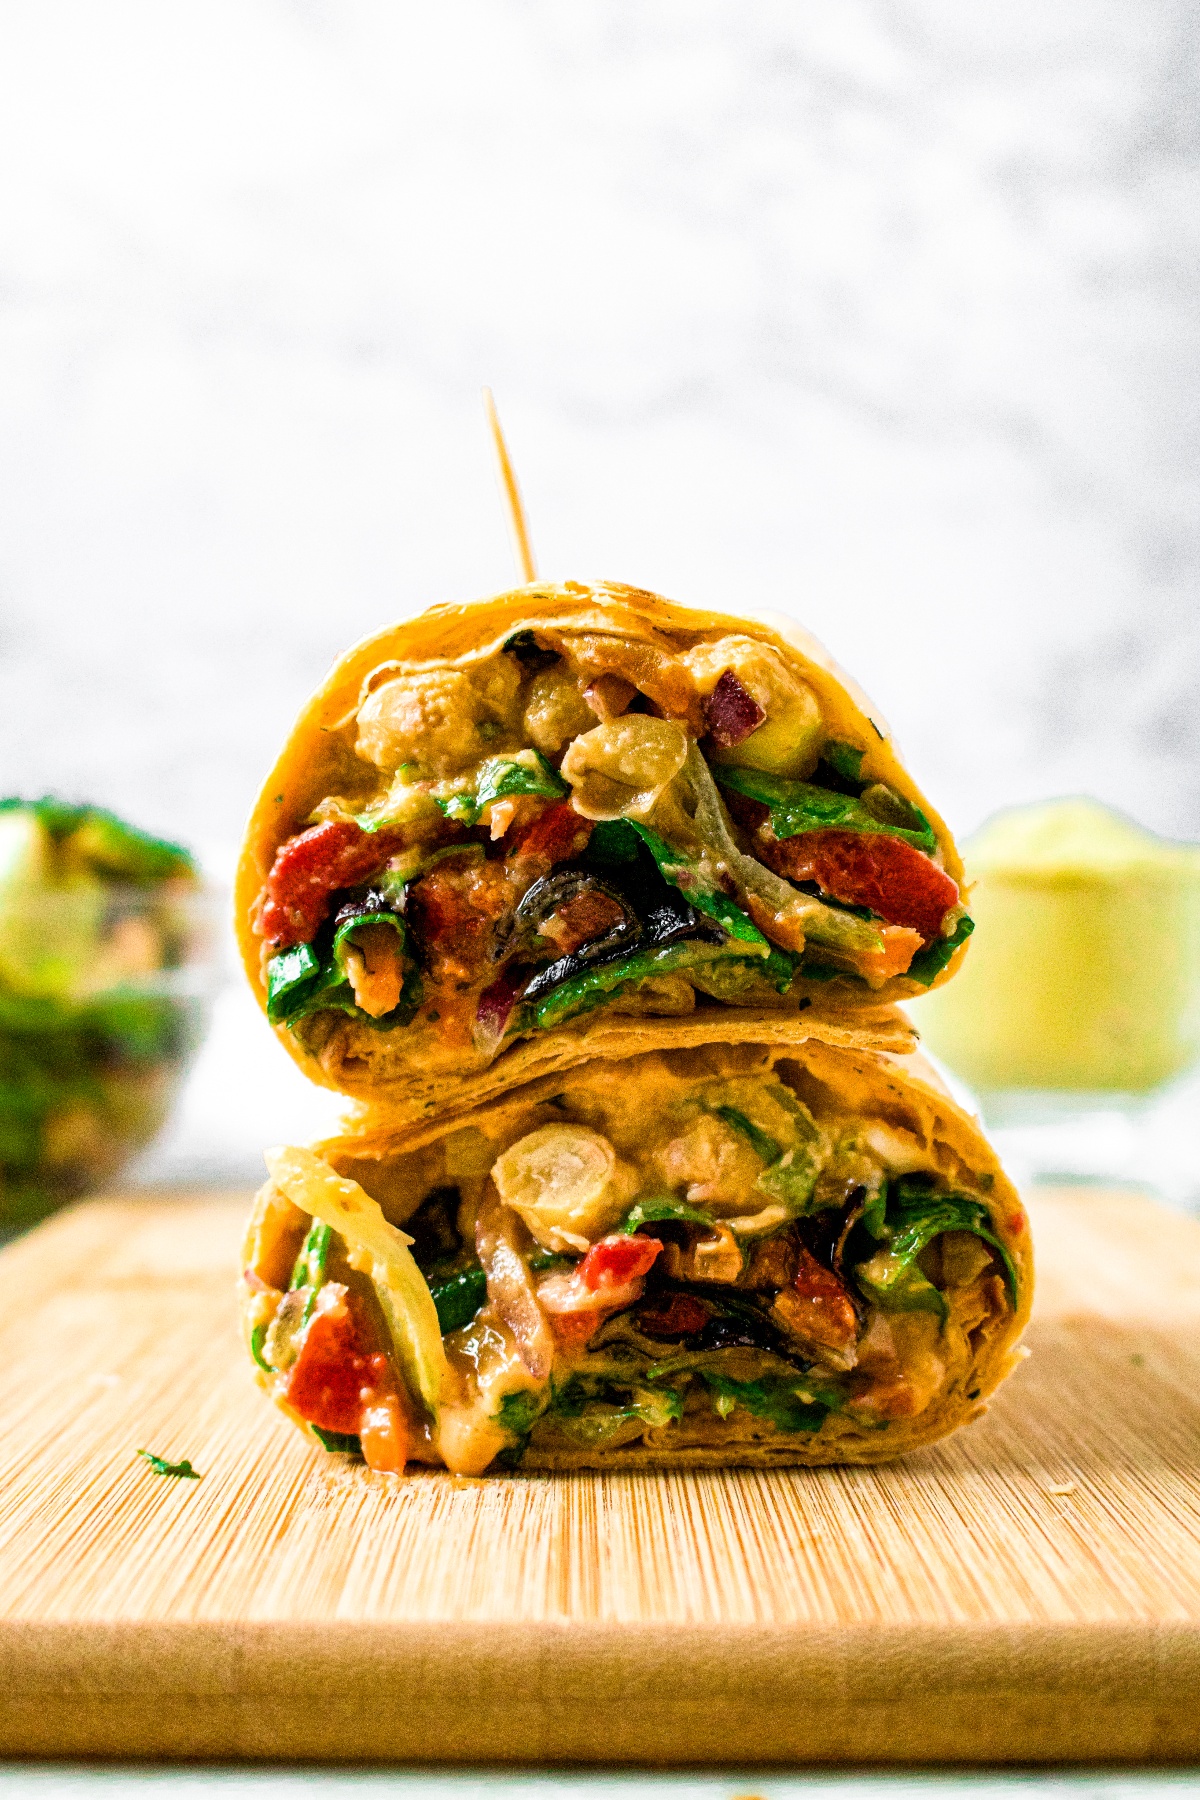 Head-on shot of a veggie wrap cut into halves and stacked on top of each other, held together with a toothpick. There is a jar of hummus and bowl of salad in the background.